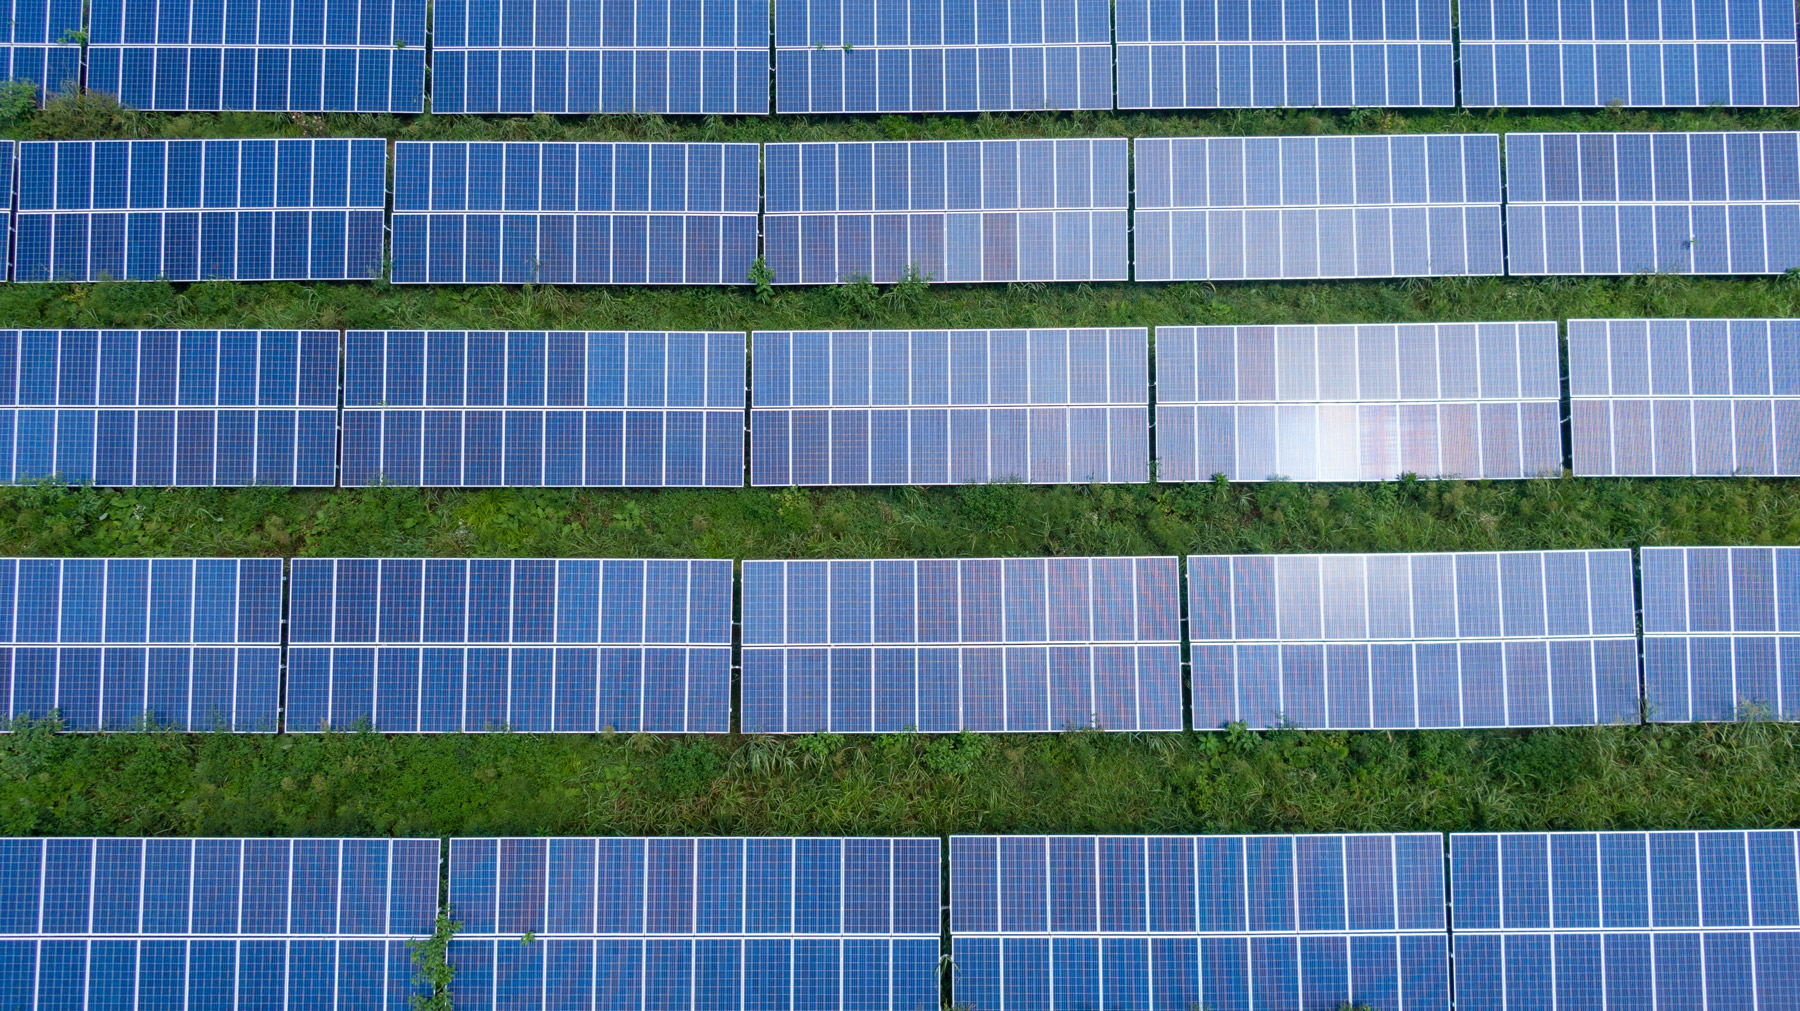 An aerial view solar panels against a background of green grass.